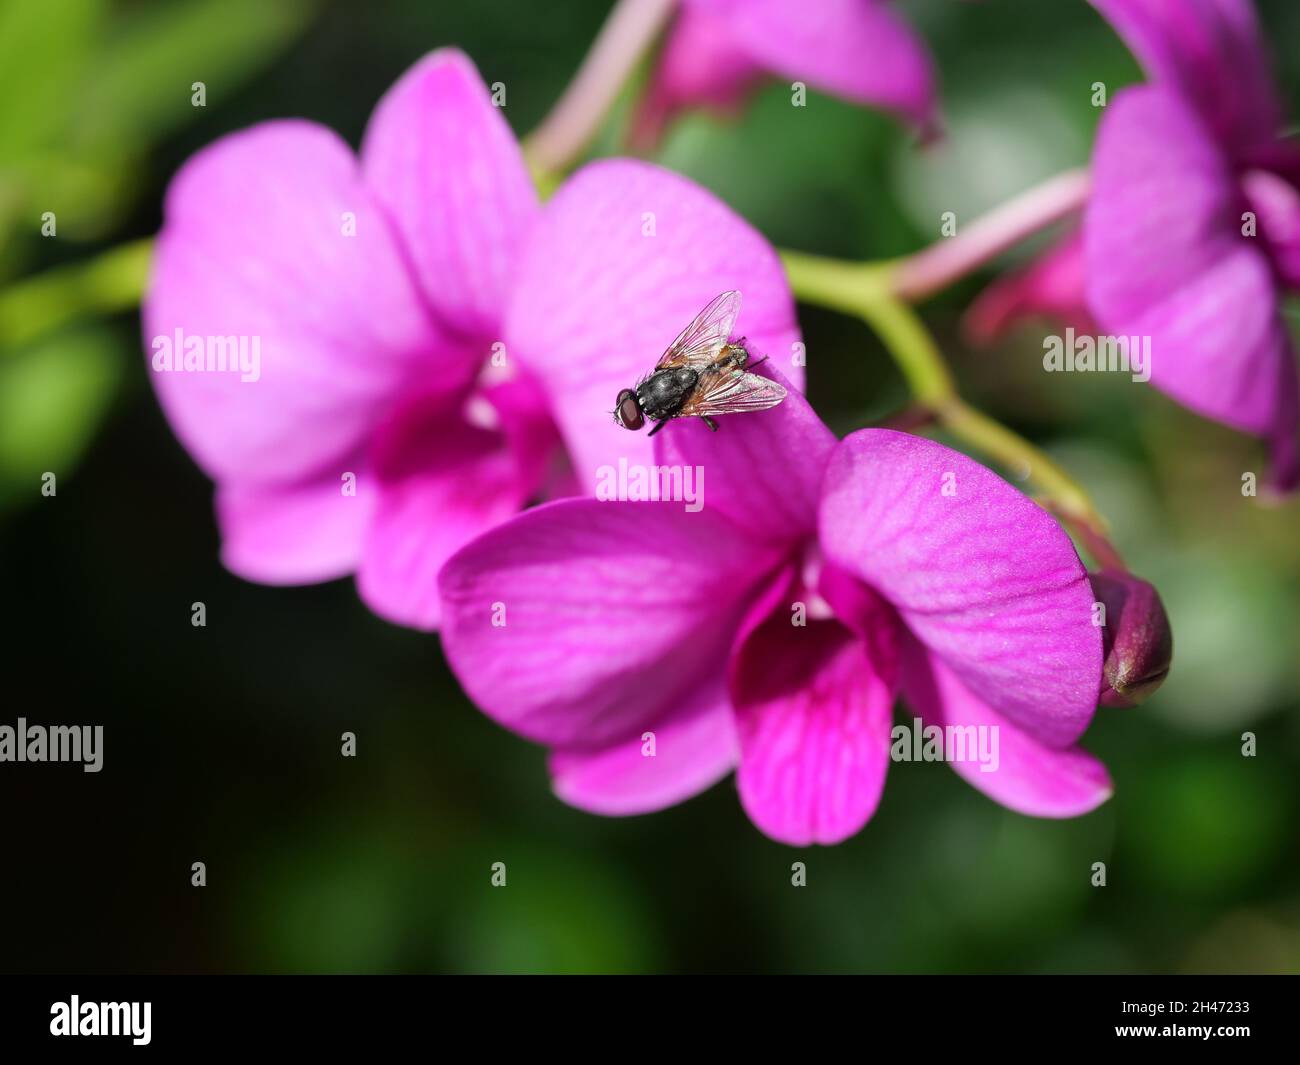 The fly on Tropical orchid flower with natural green background, Insect on petal of pink and purple flowers blooming Stock Photo